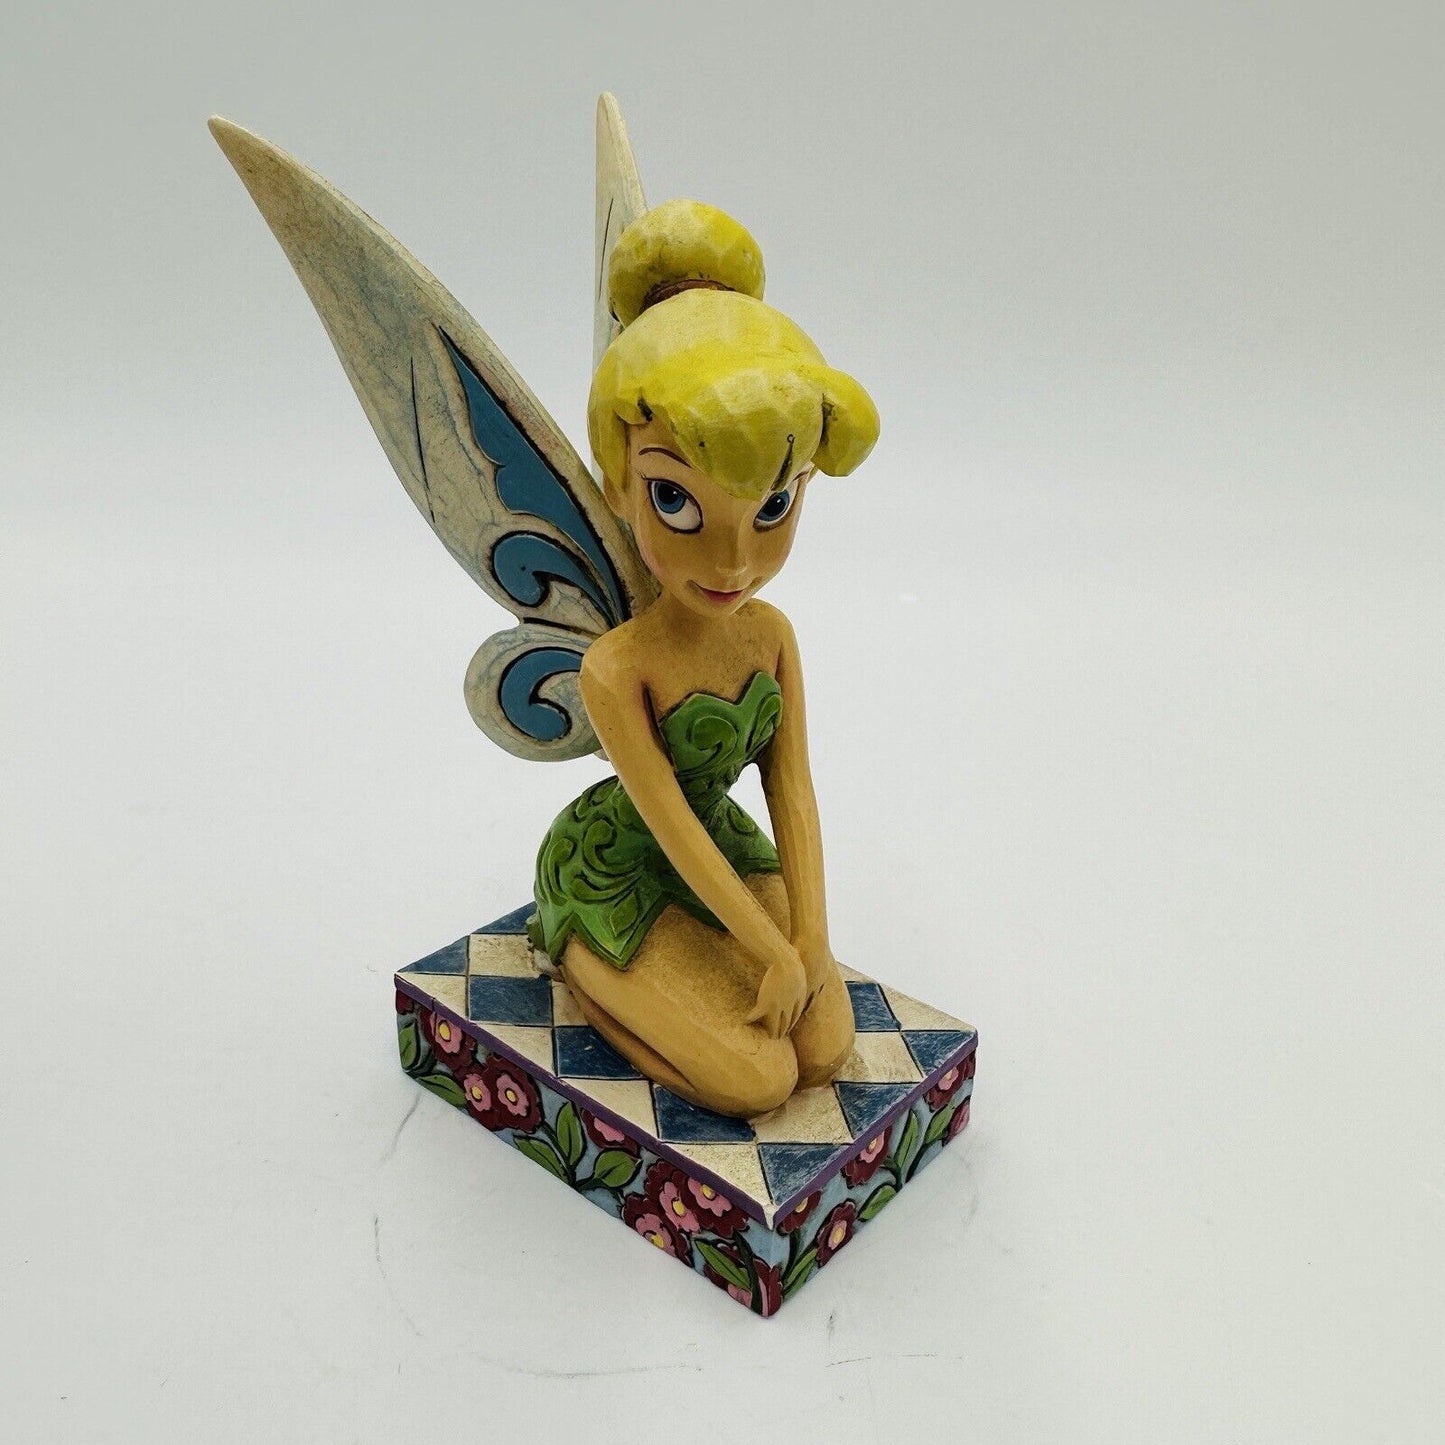 Jim Shore Tinker Bell A Pixie Delight 4011754 Disney Traditions Peter Pan Decor